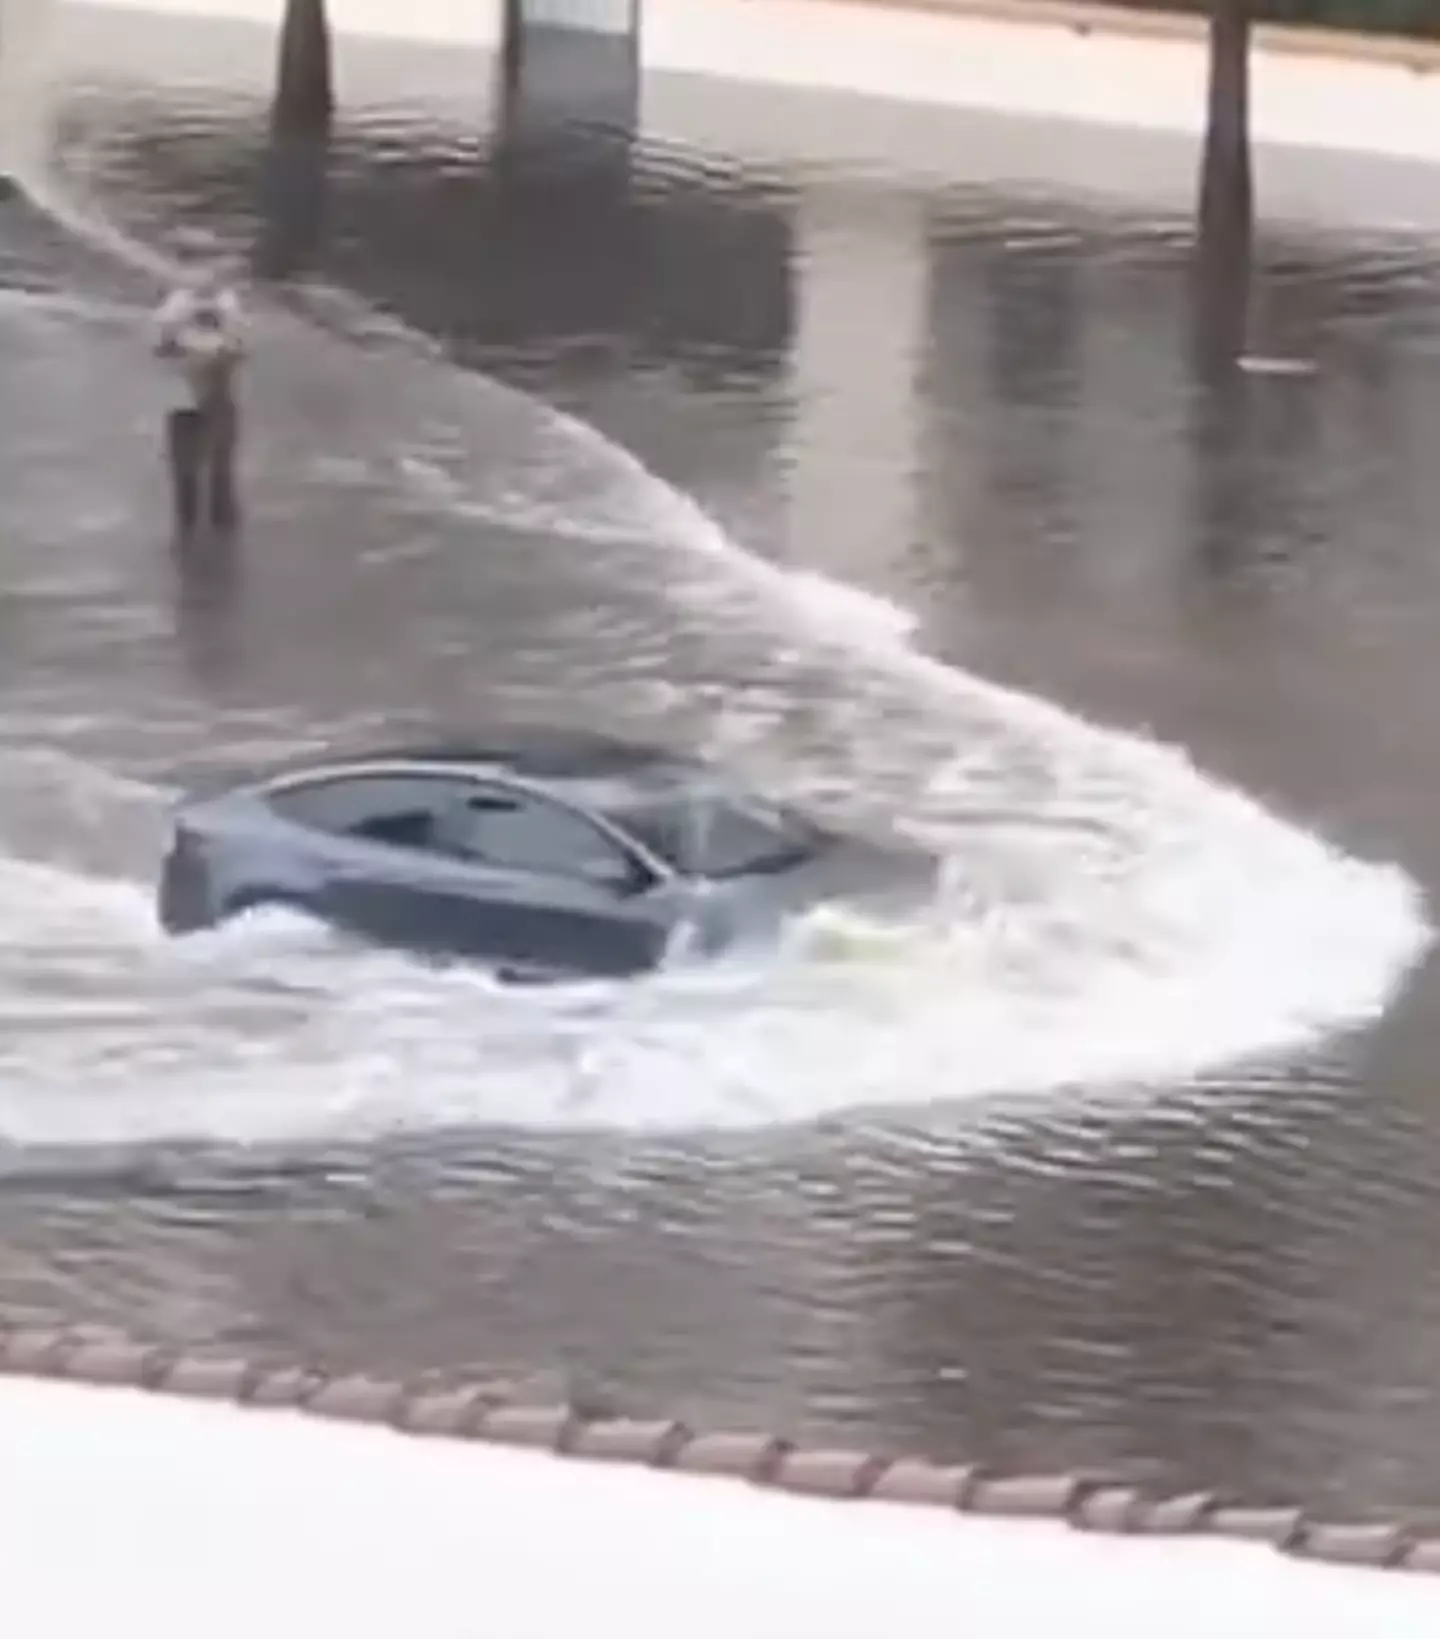 The Tesla driver is almost fully submerged in the flooded water / @‌NTFTWX / X